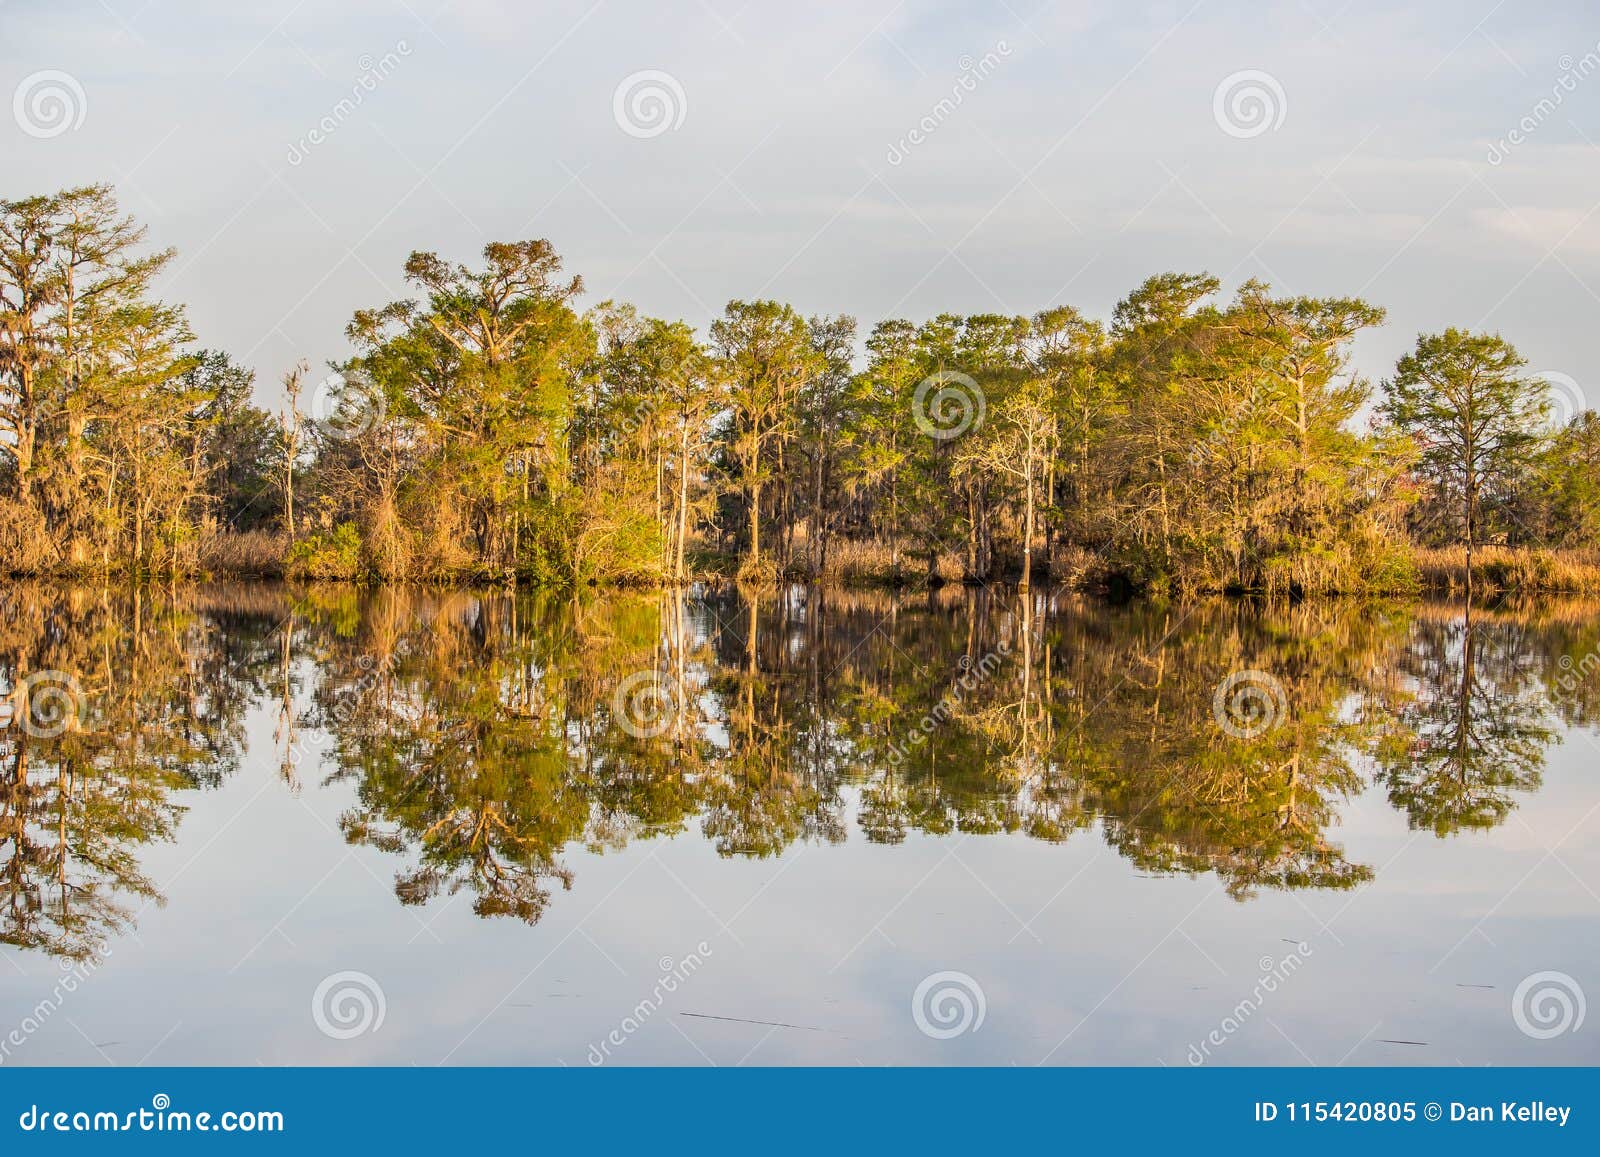 reflection of trees on the south carolina icw at thoroughfare creek